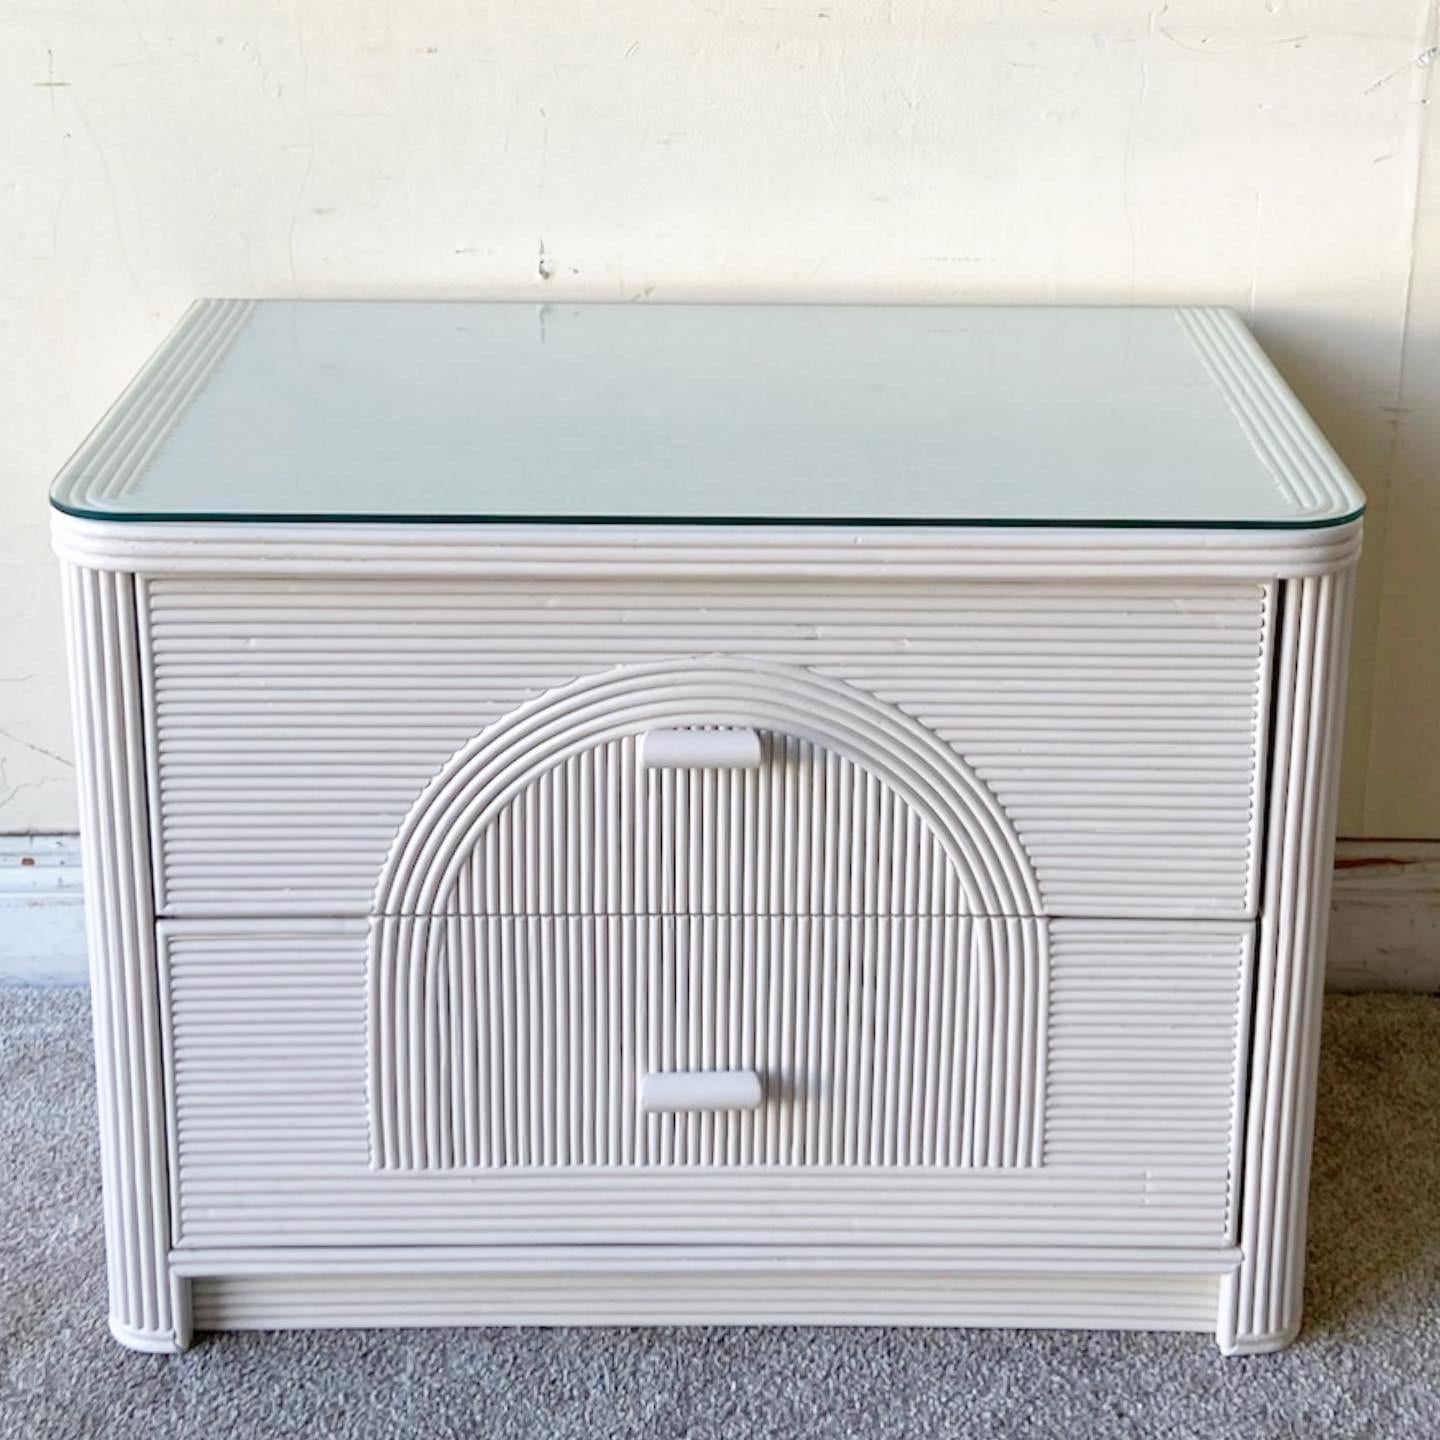 Exceptional boho chic white pencil reed nightstand/end table. Features a glass top with an arched pencil reed design across the two spacious drawers. 